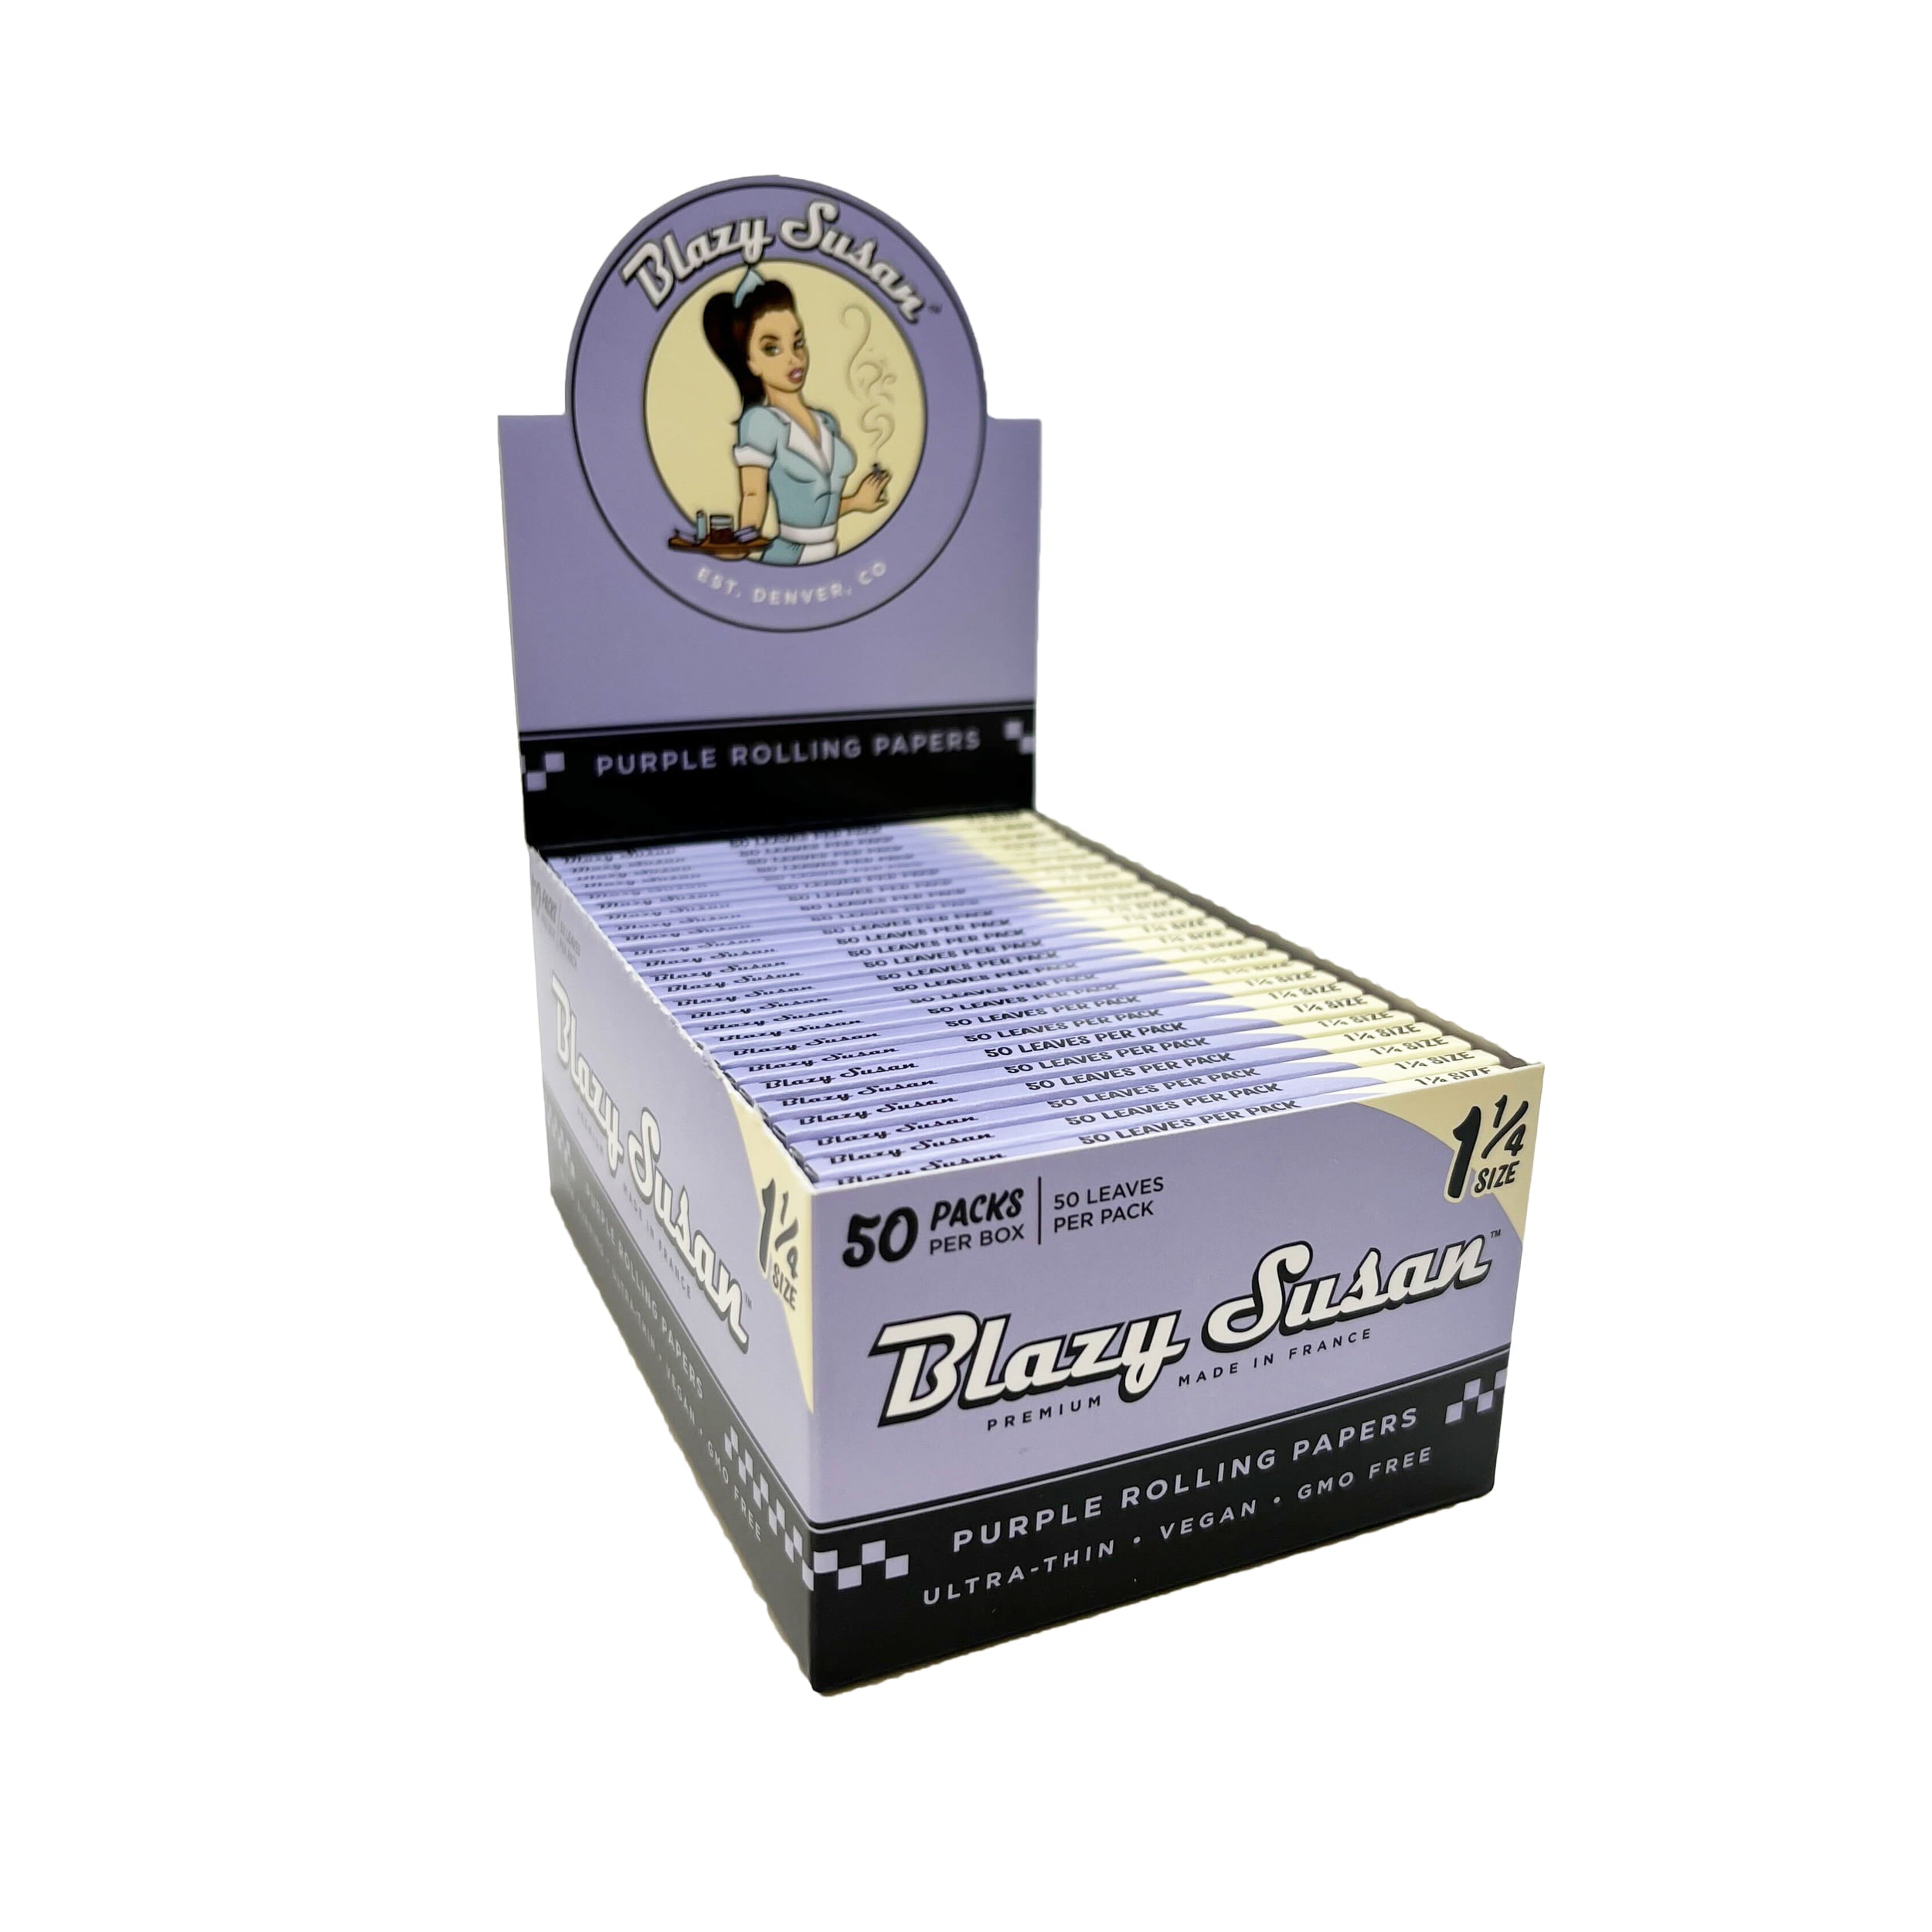 Blazy Susan 1 ¼ Rolling Papers Wholesale – 1 Box / 50packs